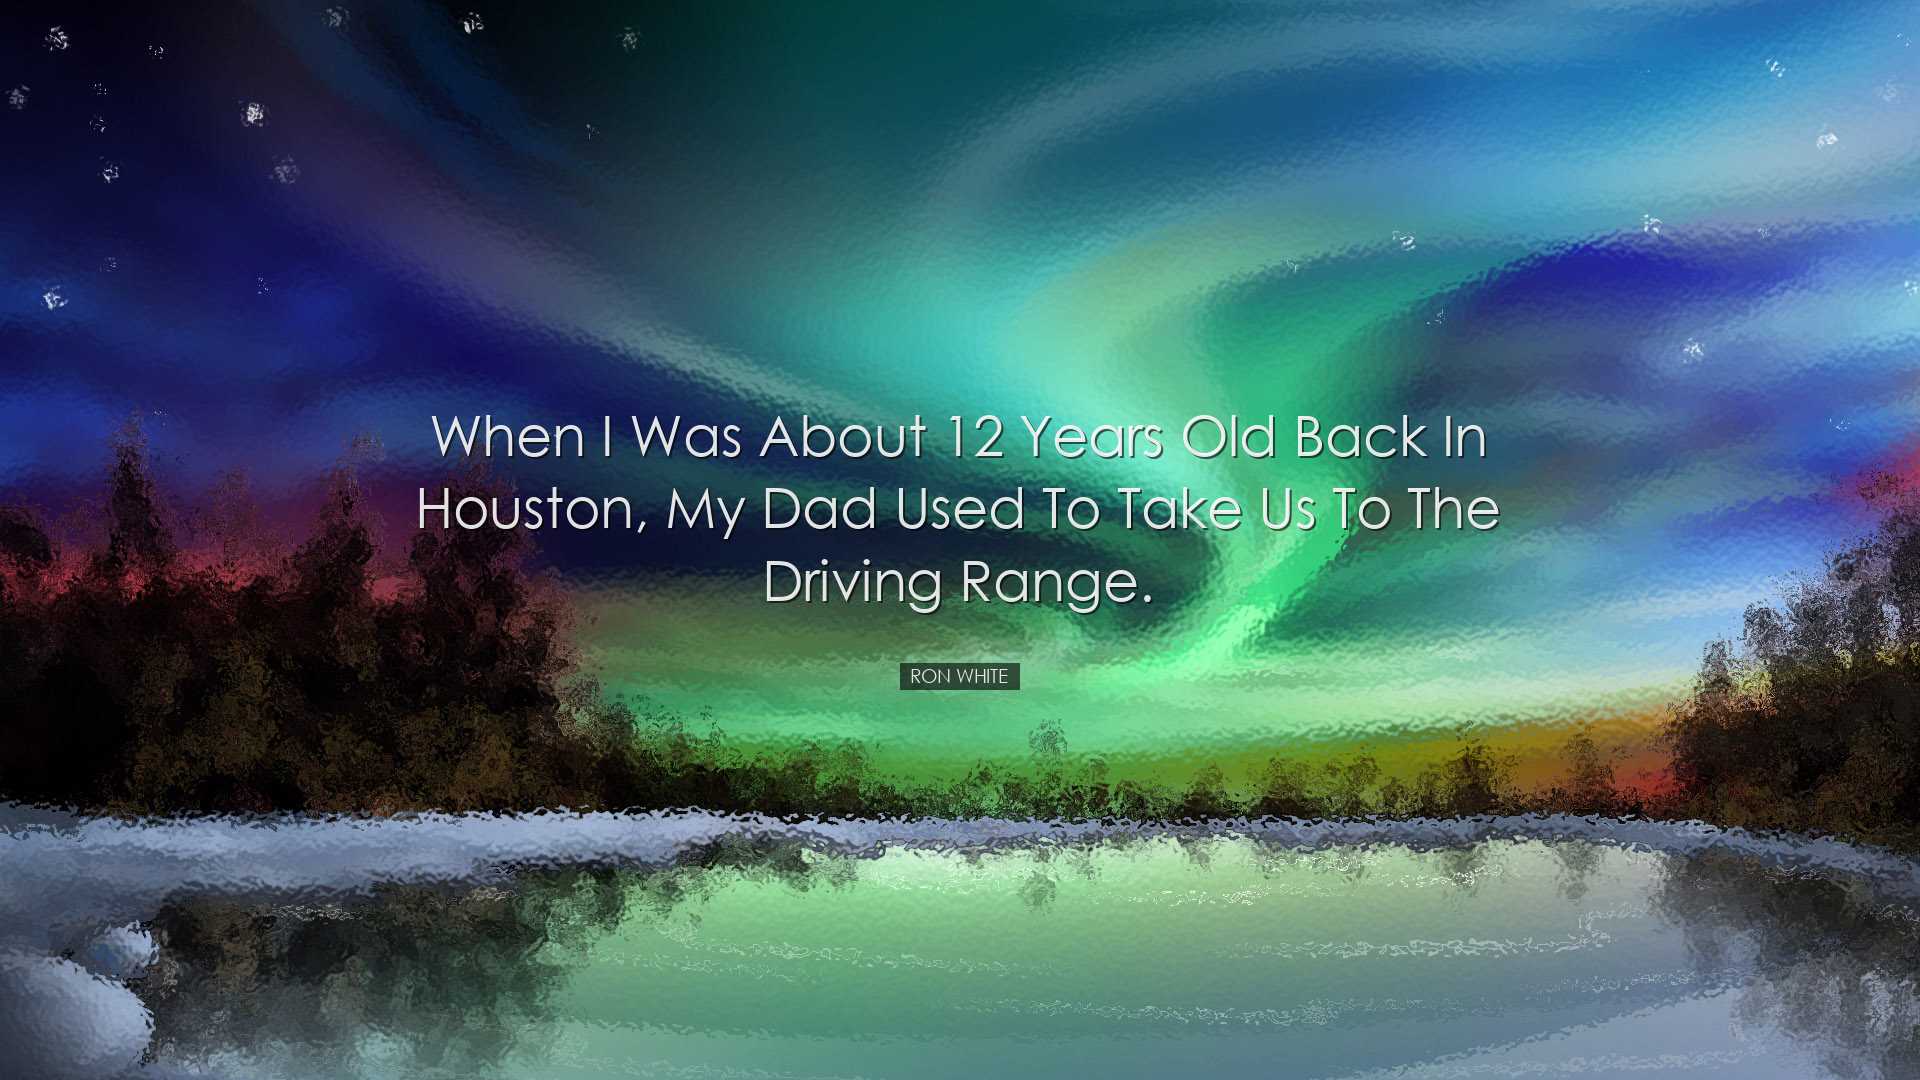 When I was about 12 years old back in Houston, my Dad used to take